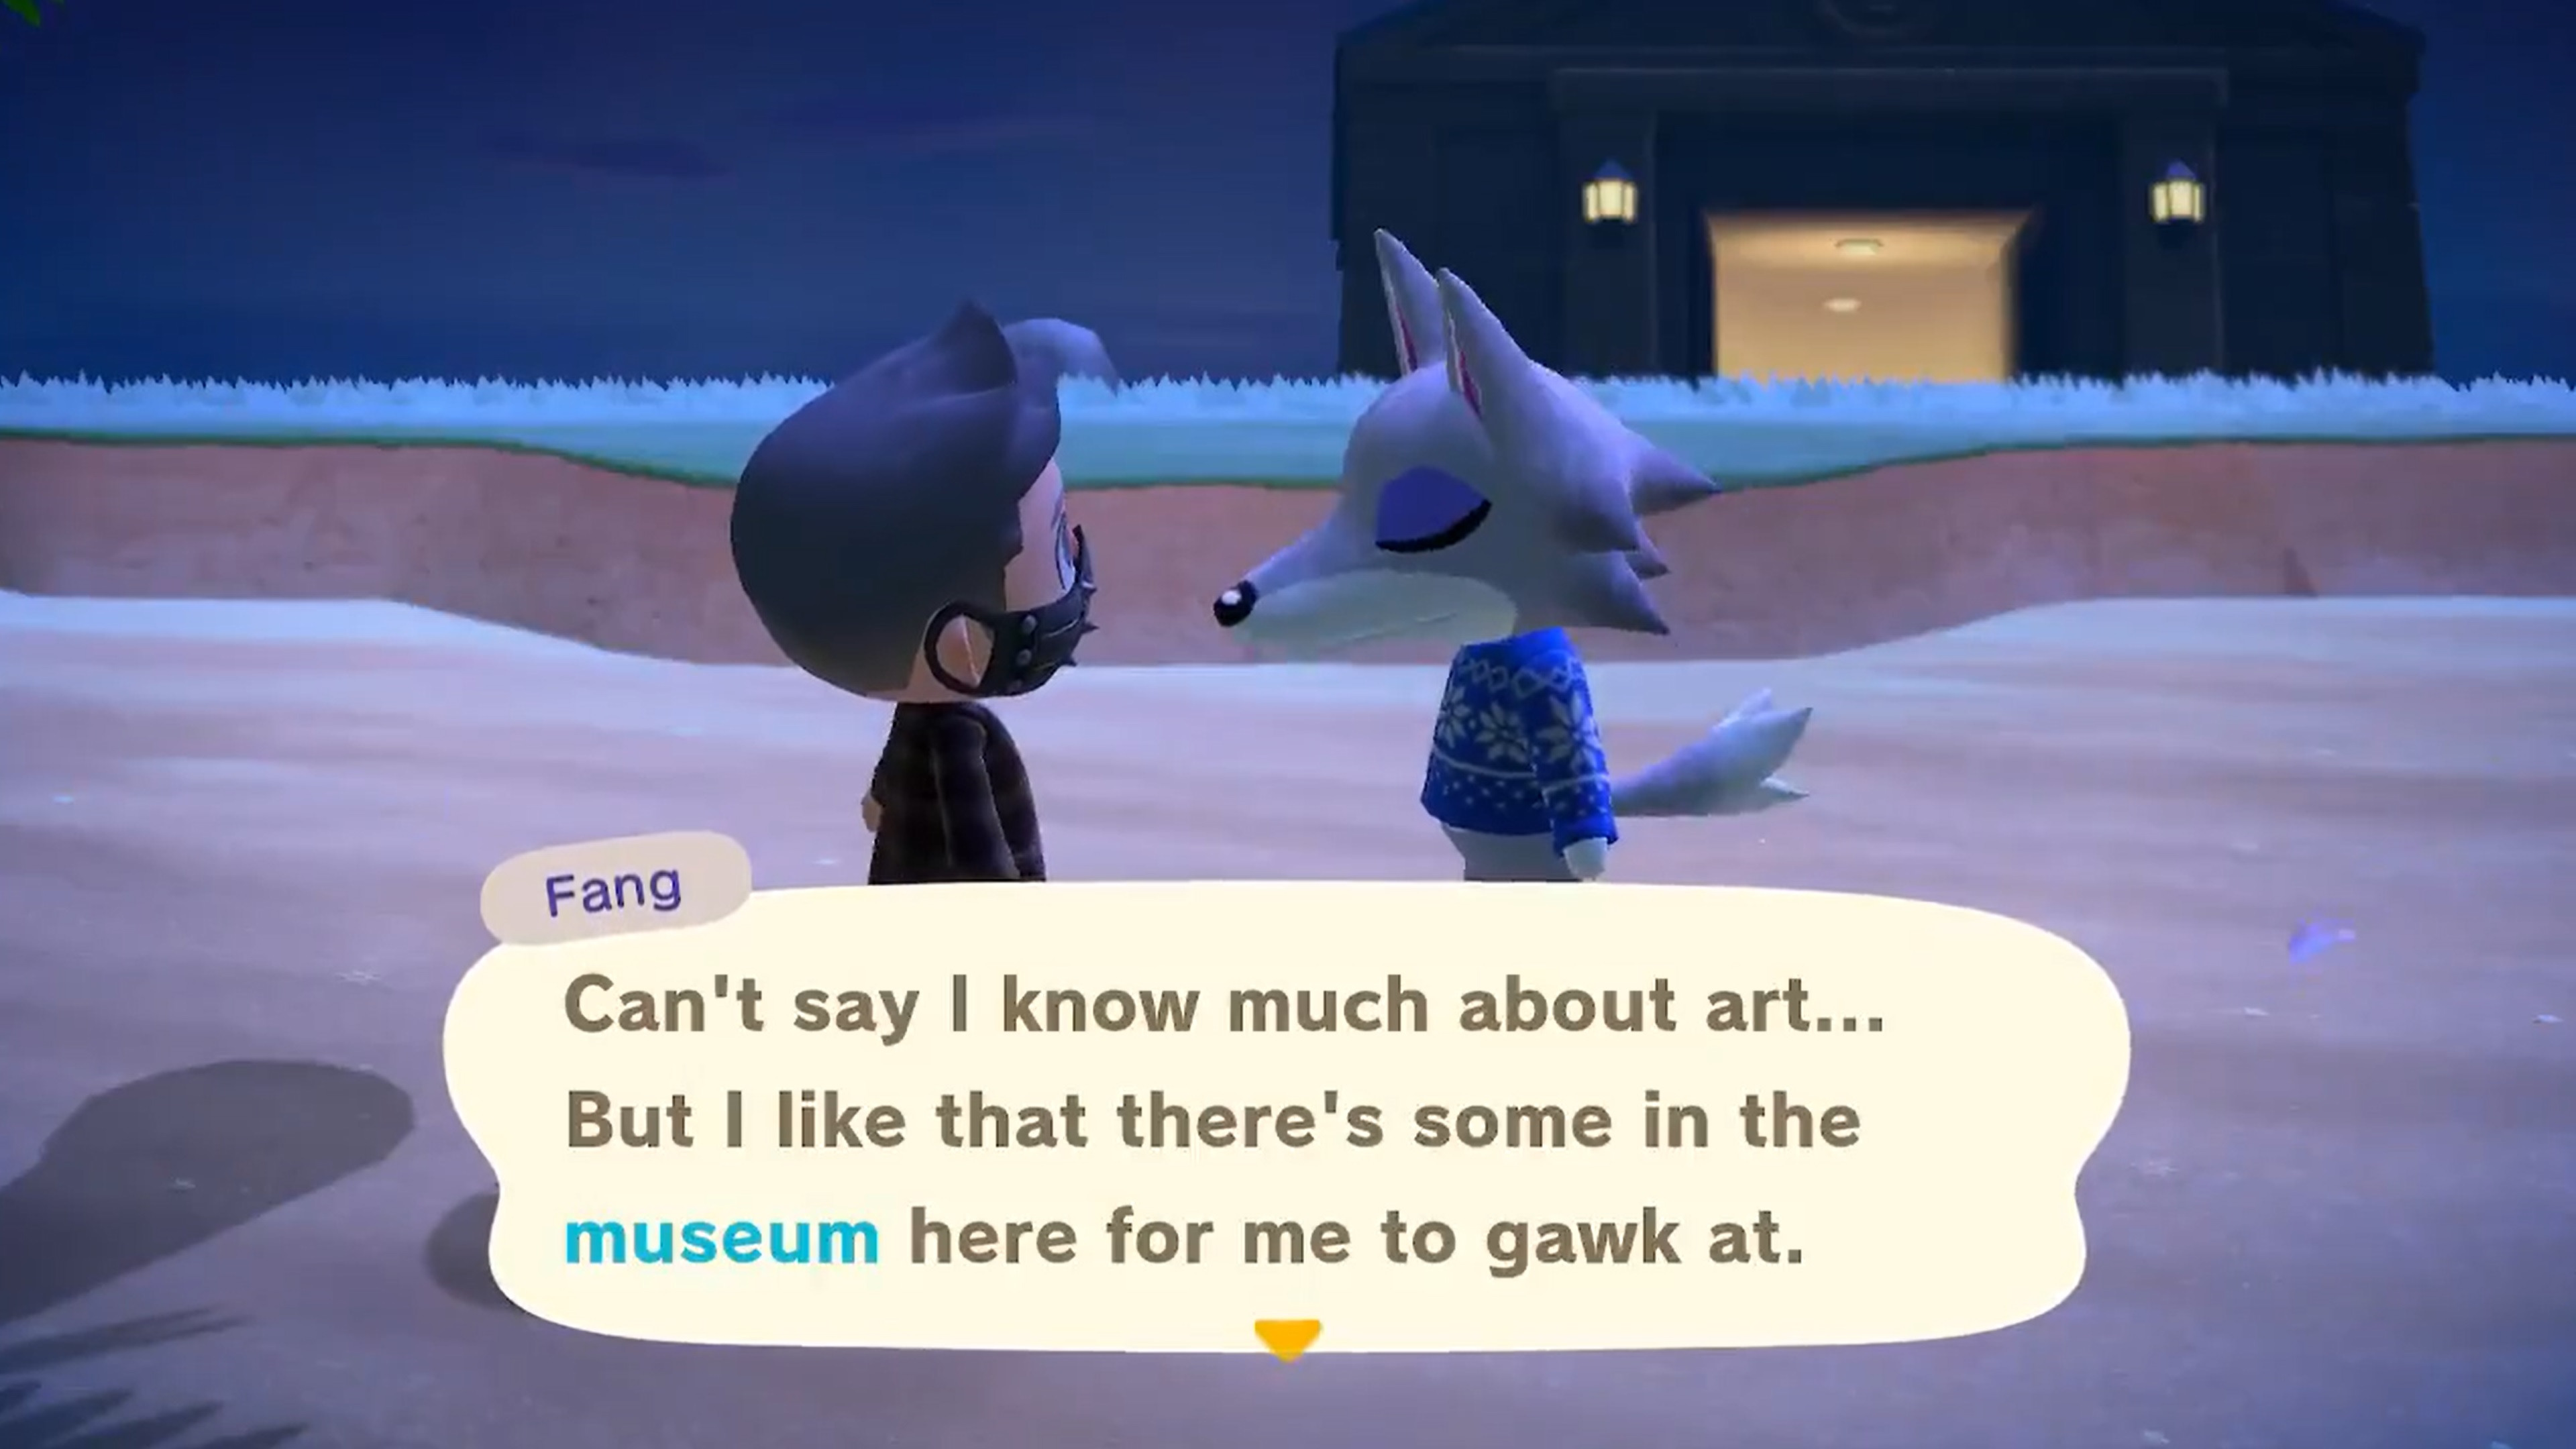 Animal Crossing: New Horizons NPC dialogue has players wondering if an art  wing is coming to the museum